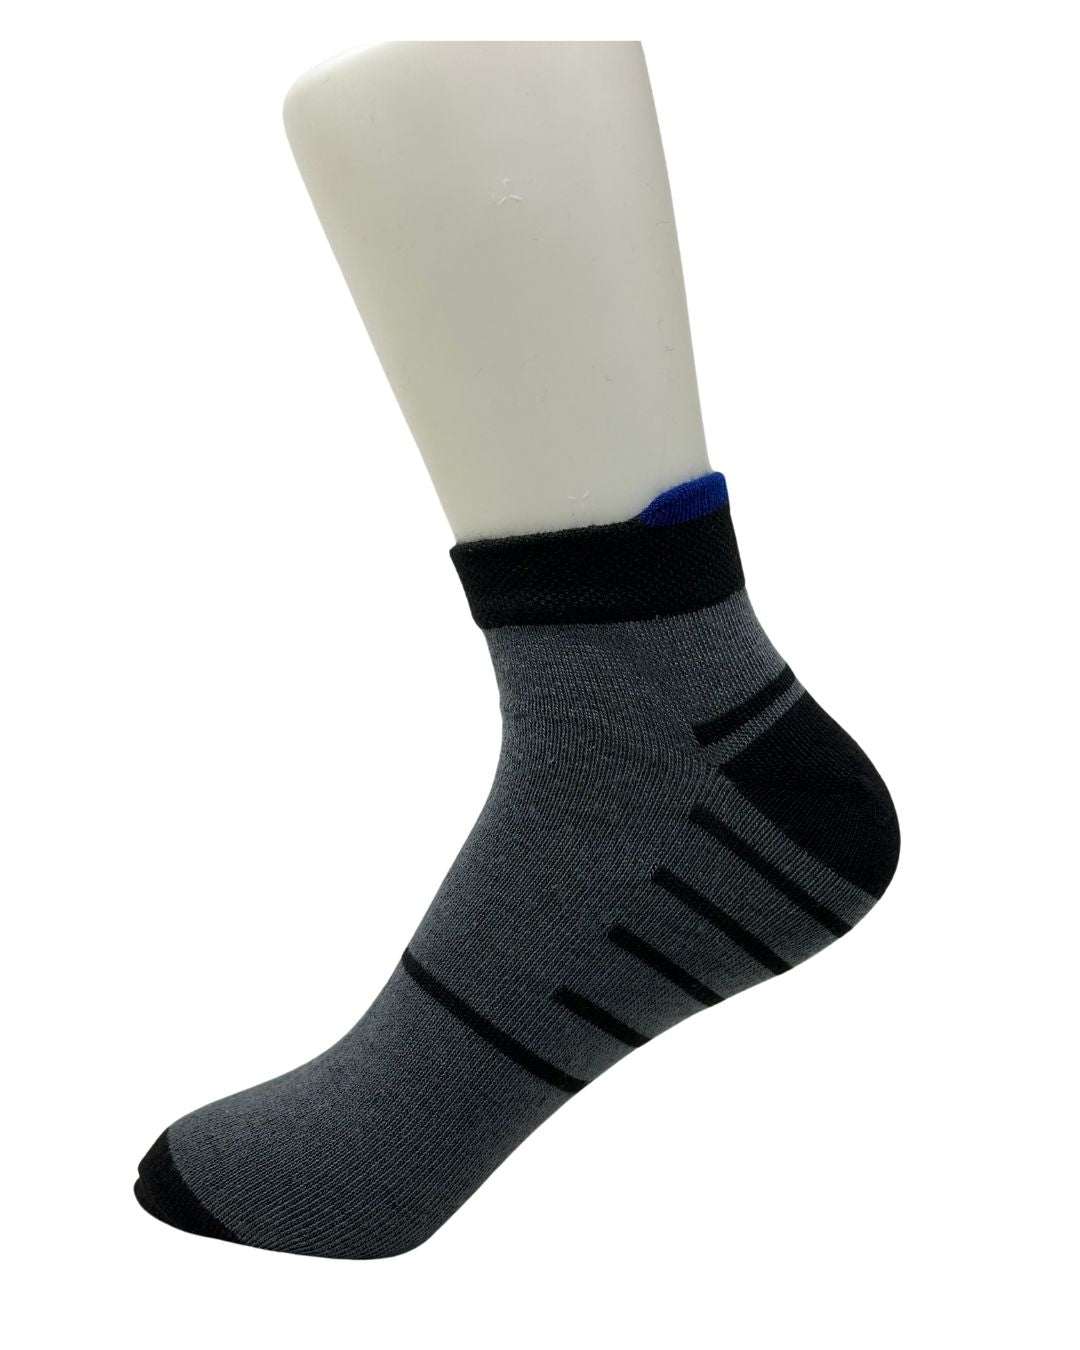 Athletic Special Design Ankle Length Socks |Free Size |Pack of 4 Pairs |With Third Heel